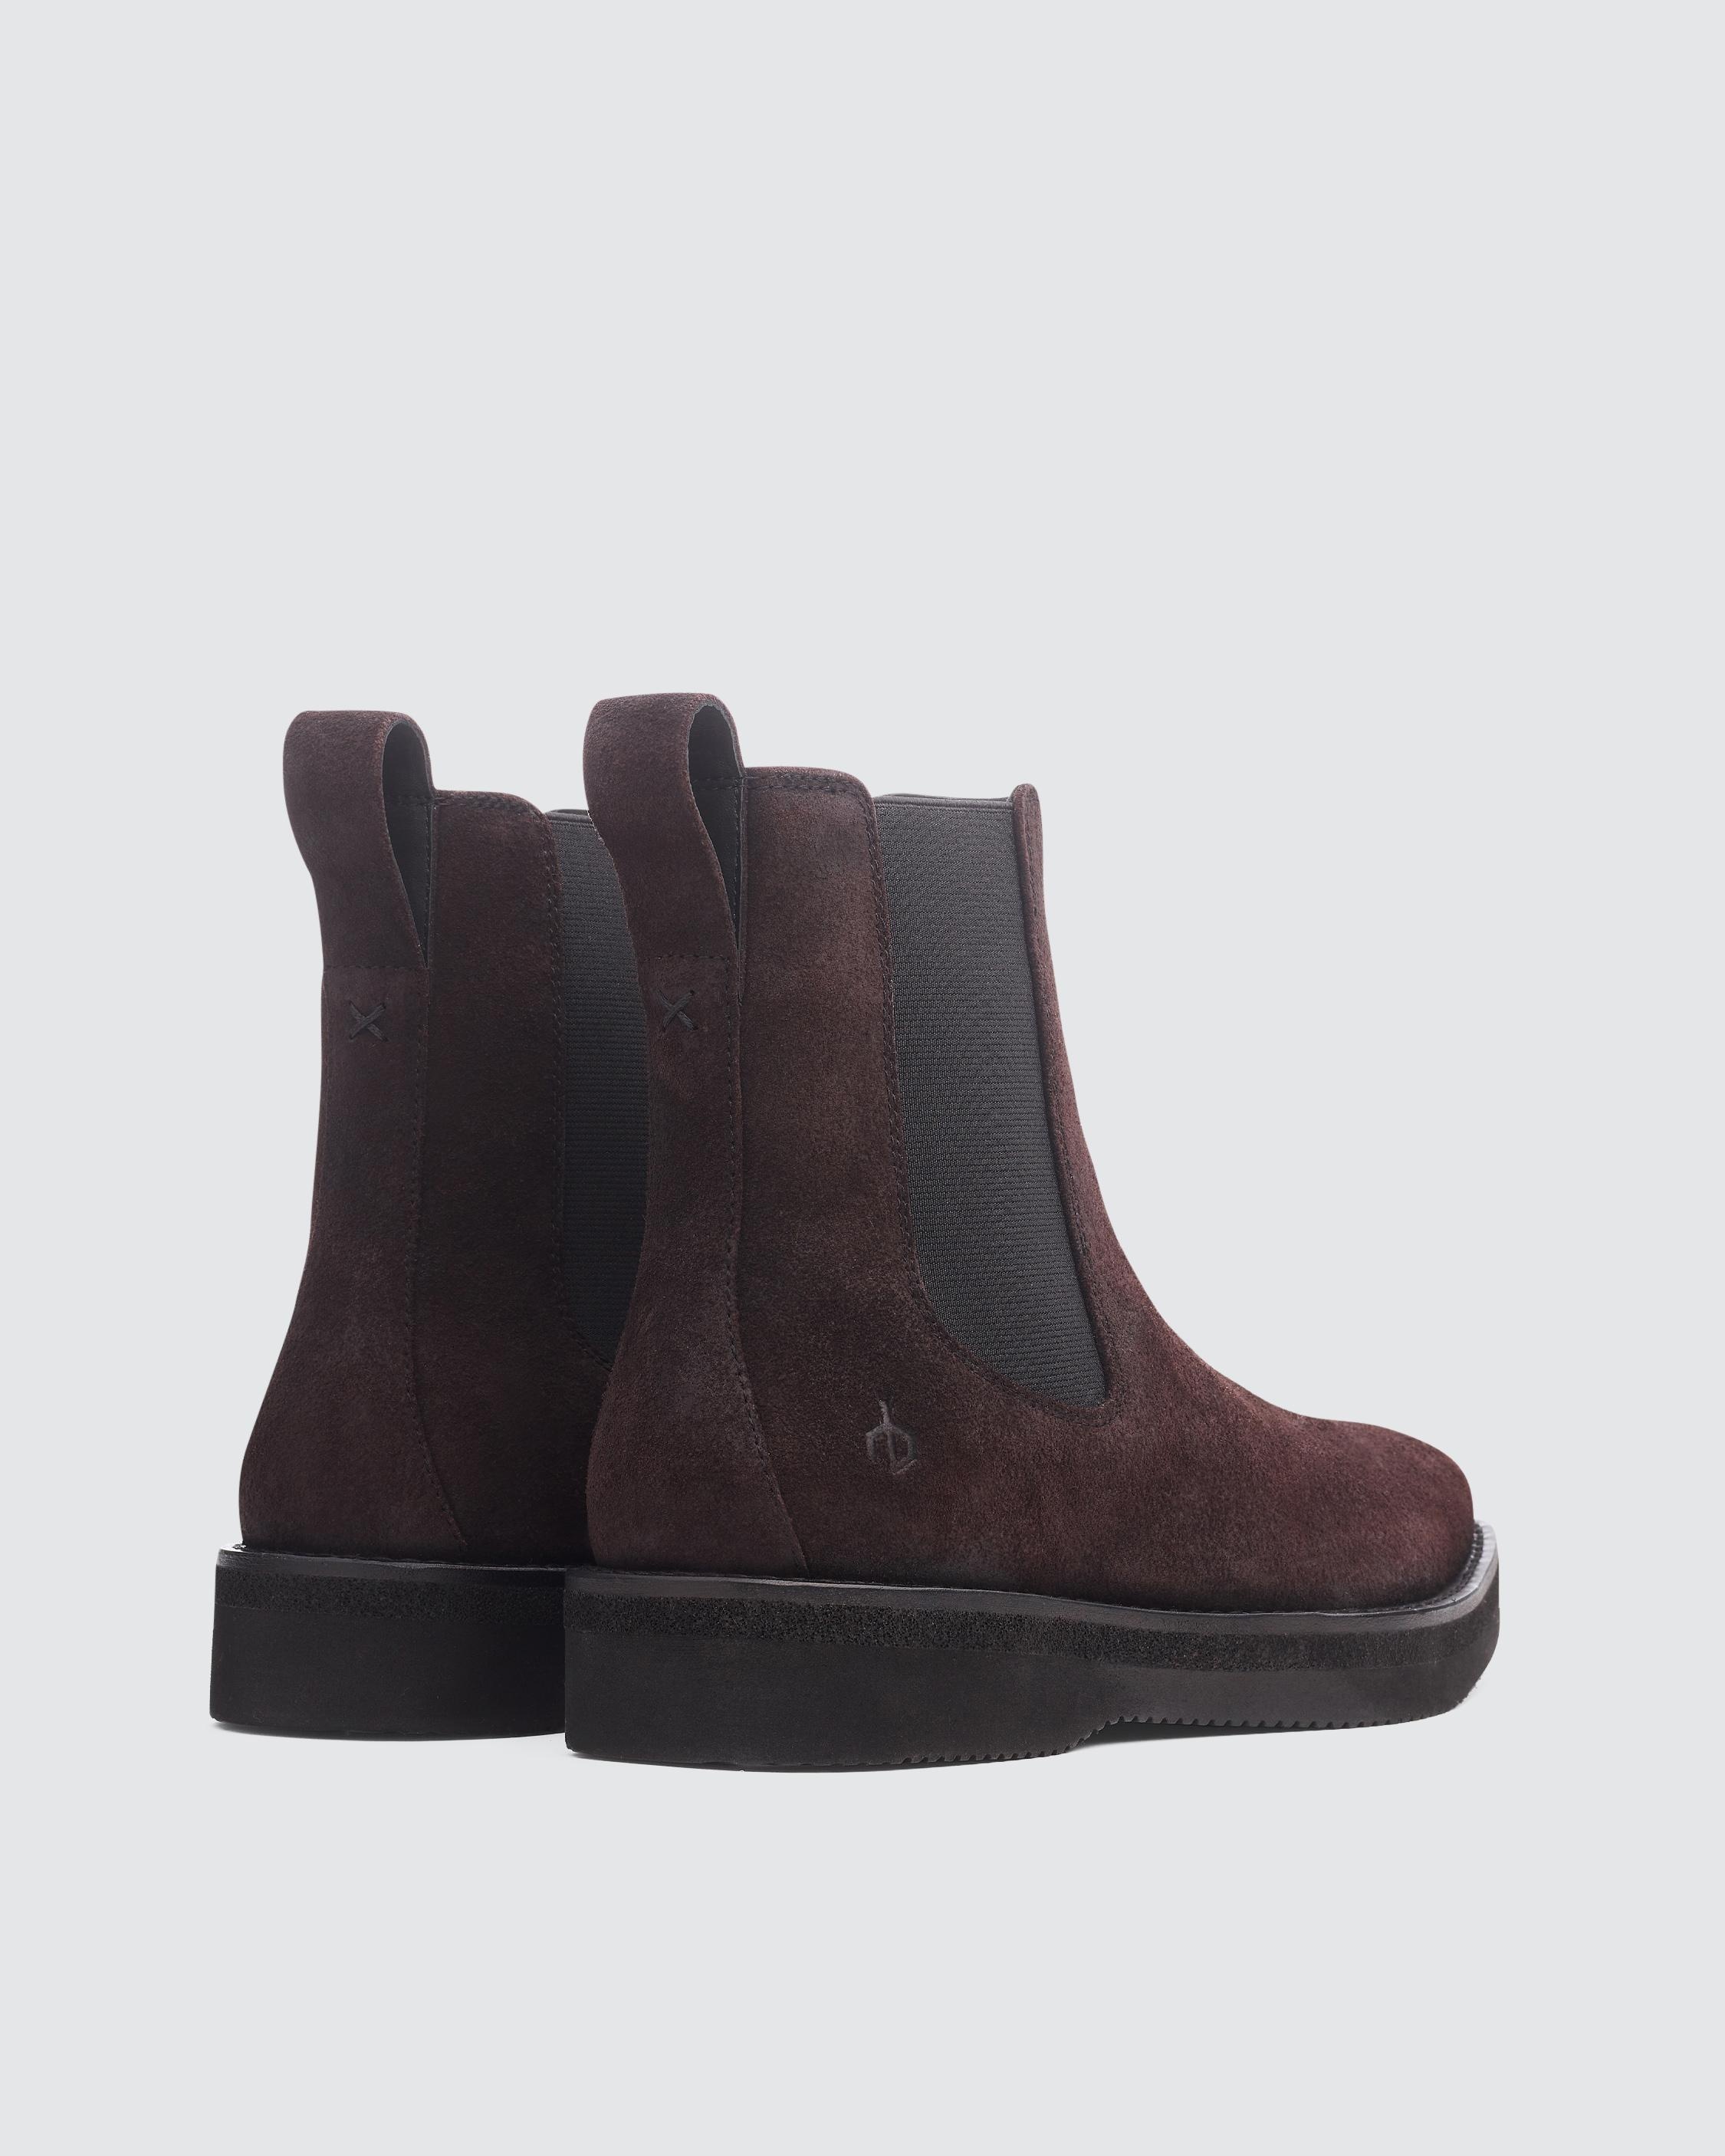 Bedford Boot - Suede
Chelsea Boot - 4